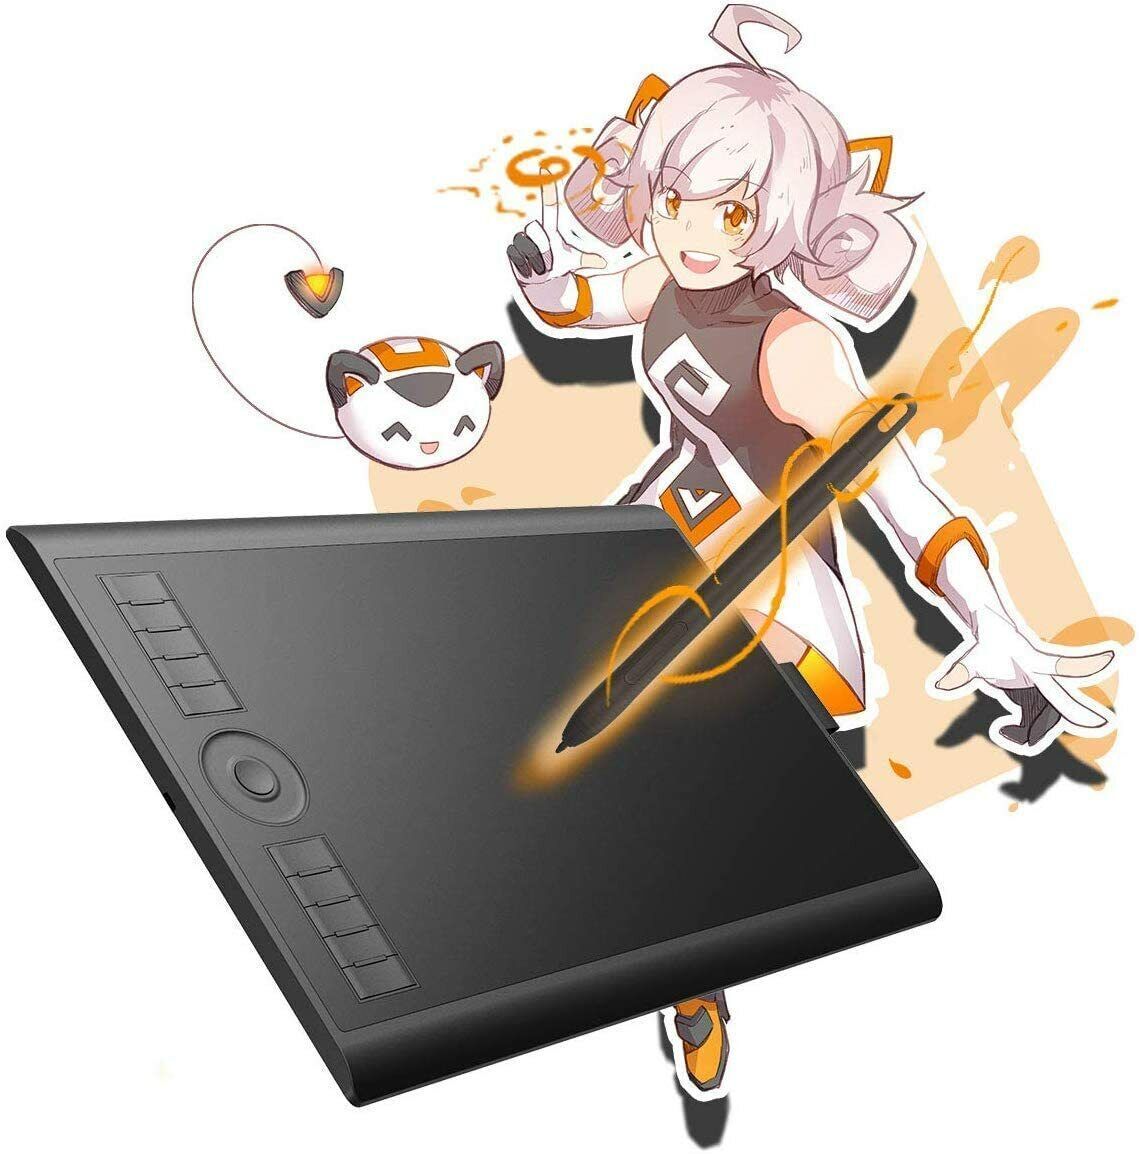 GAOMON M10K2018 10x6.25'' Graphic Drawing Tablet w/ 8192 Levels of Pressure